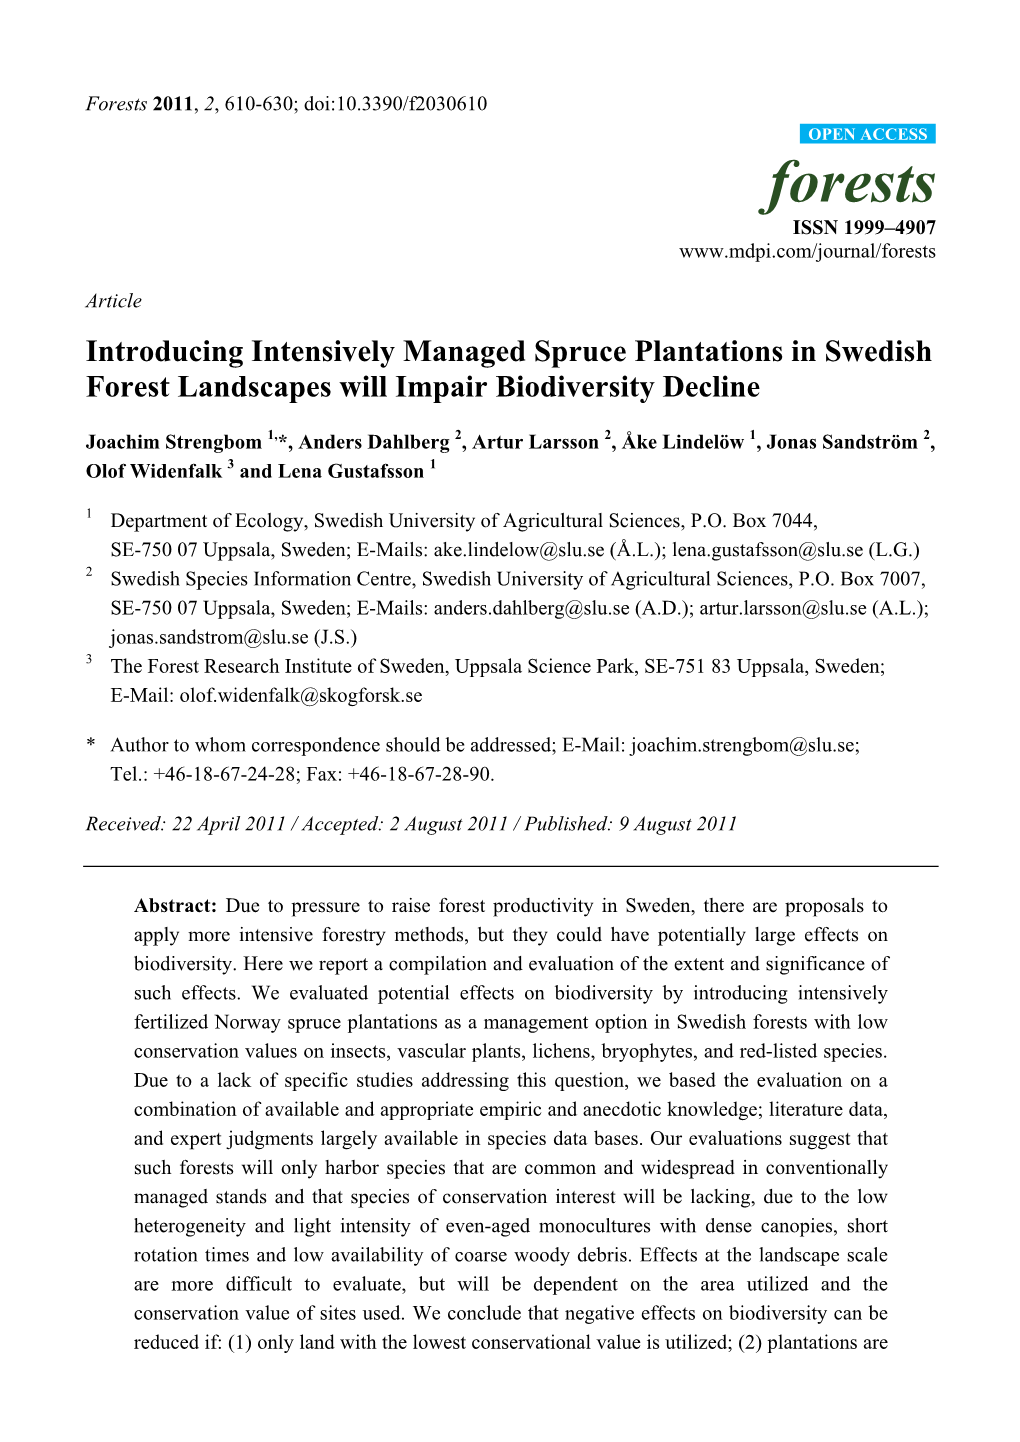 Introducing Intensively Managed Spruce Plantations in Swedish Forest Landscapes Will Impair Biodiversity Decline